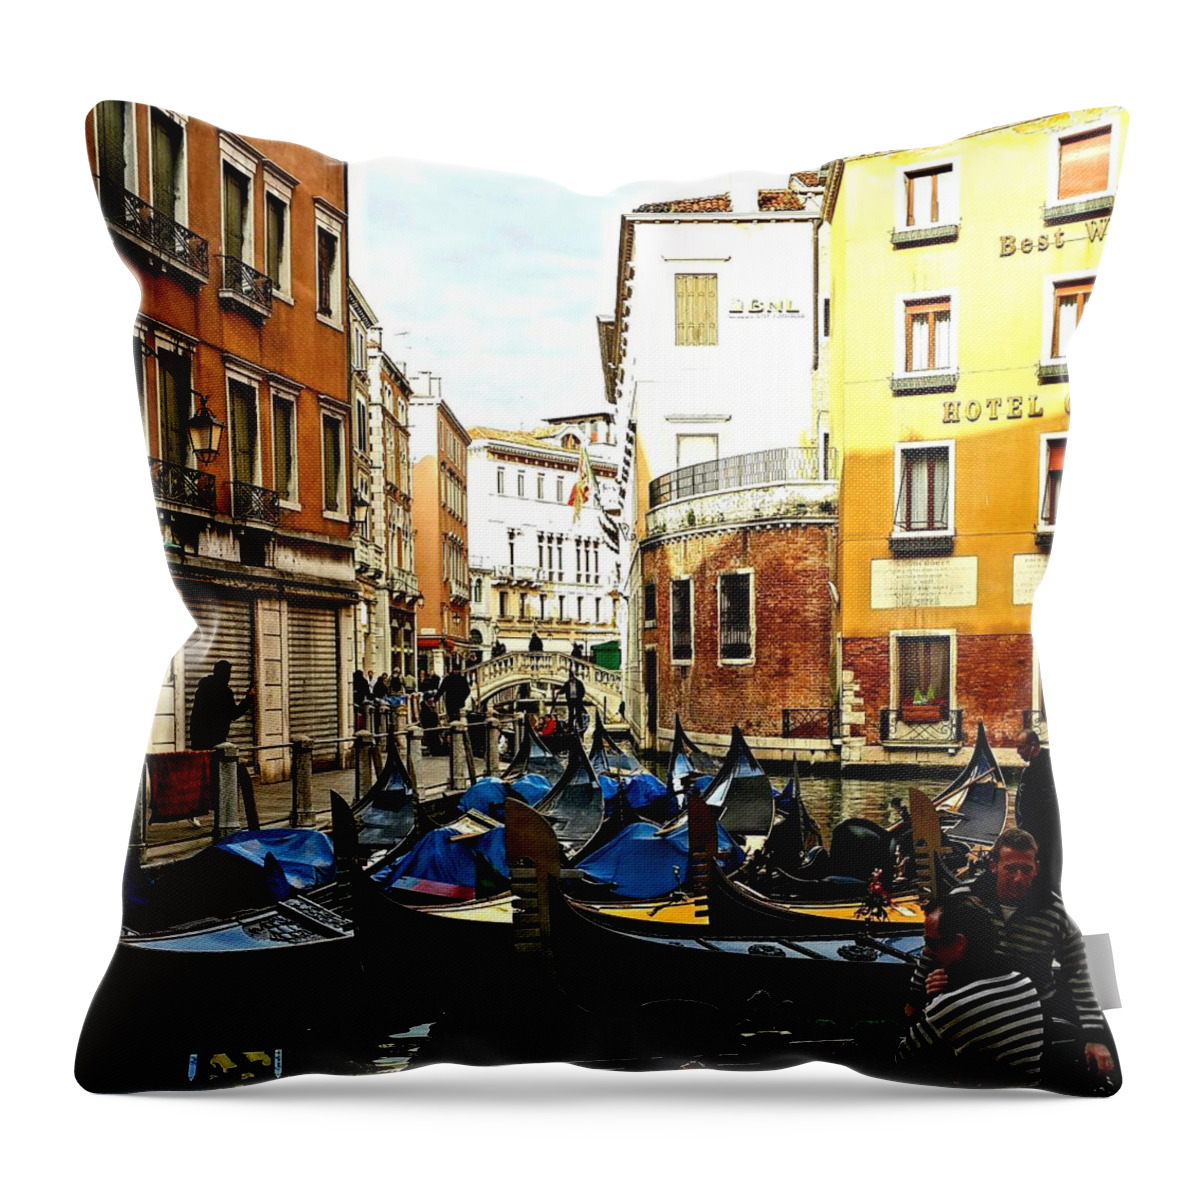  Throw Pillow featuring the photograph Venice Italy by Lush Life Travel